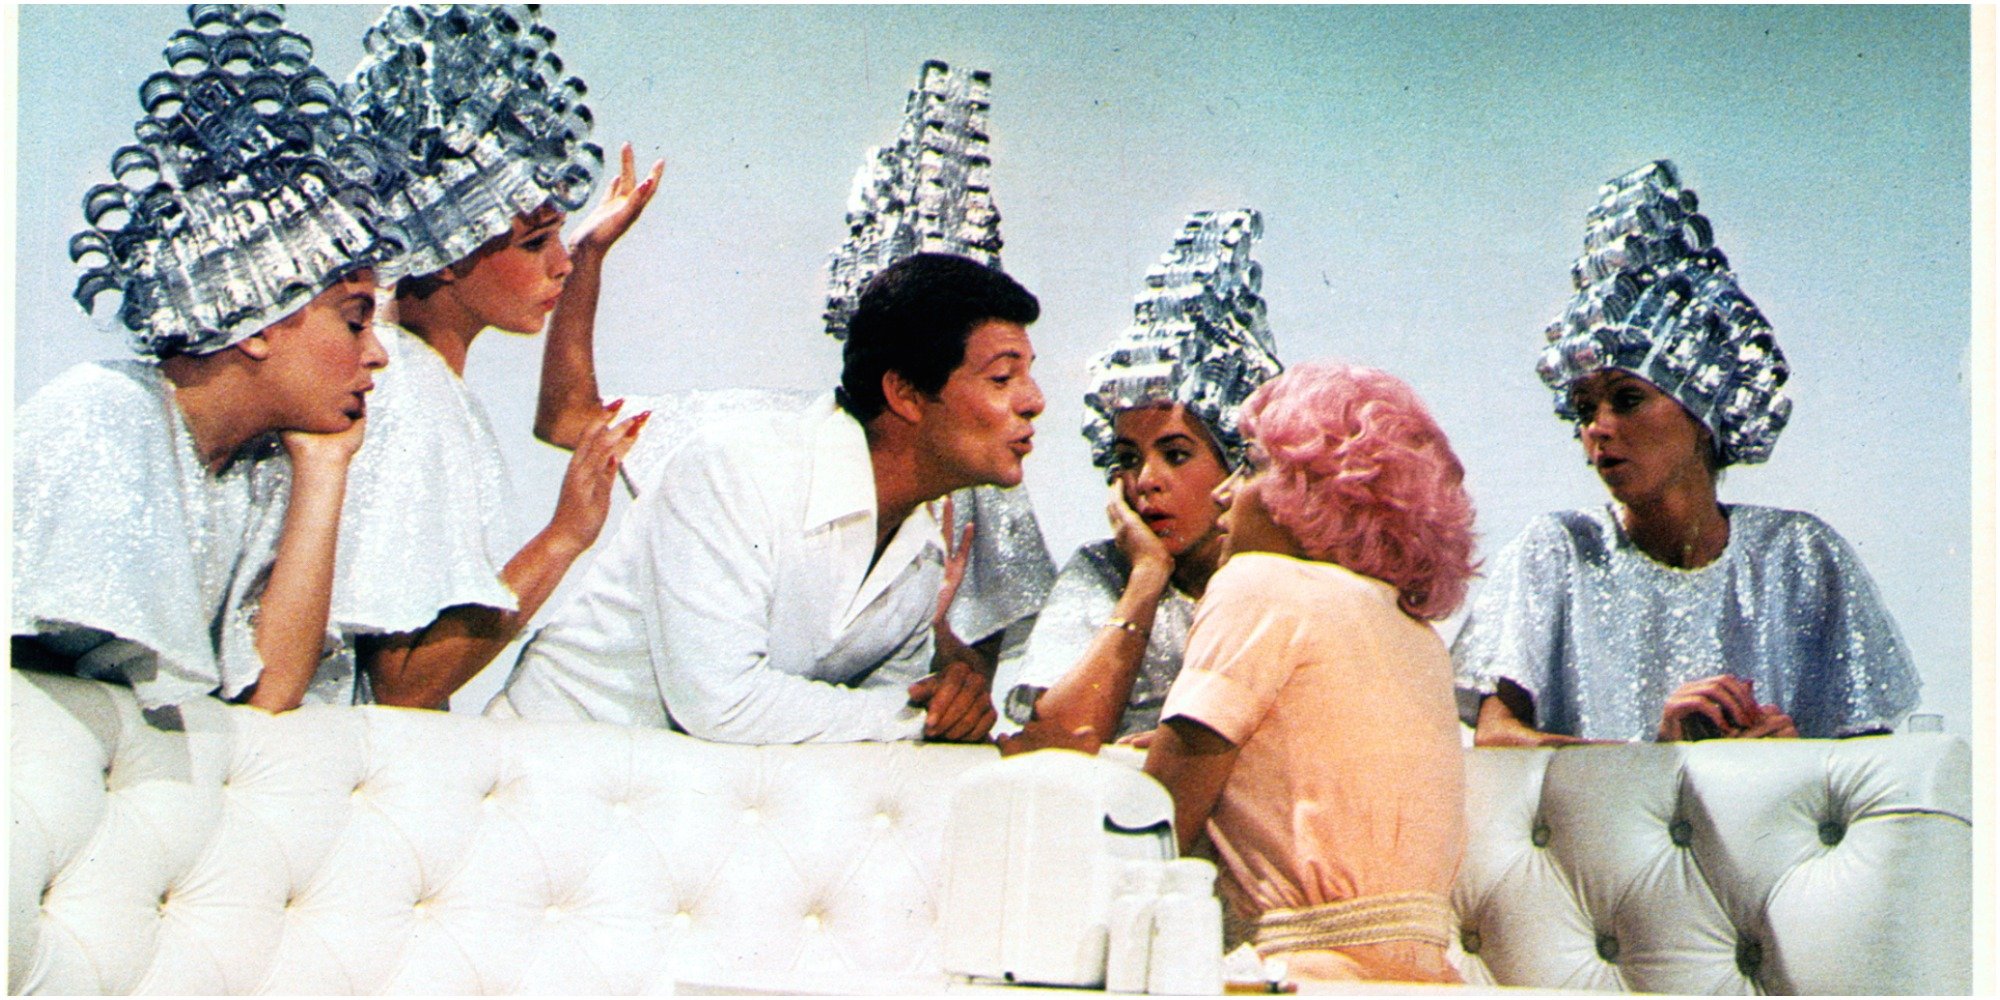 Frankie Avalon stars as Teen Angel in a scene from the 1978 film "Grease."